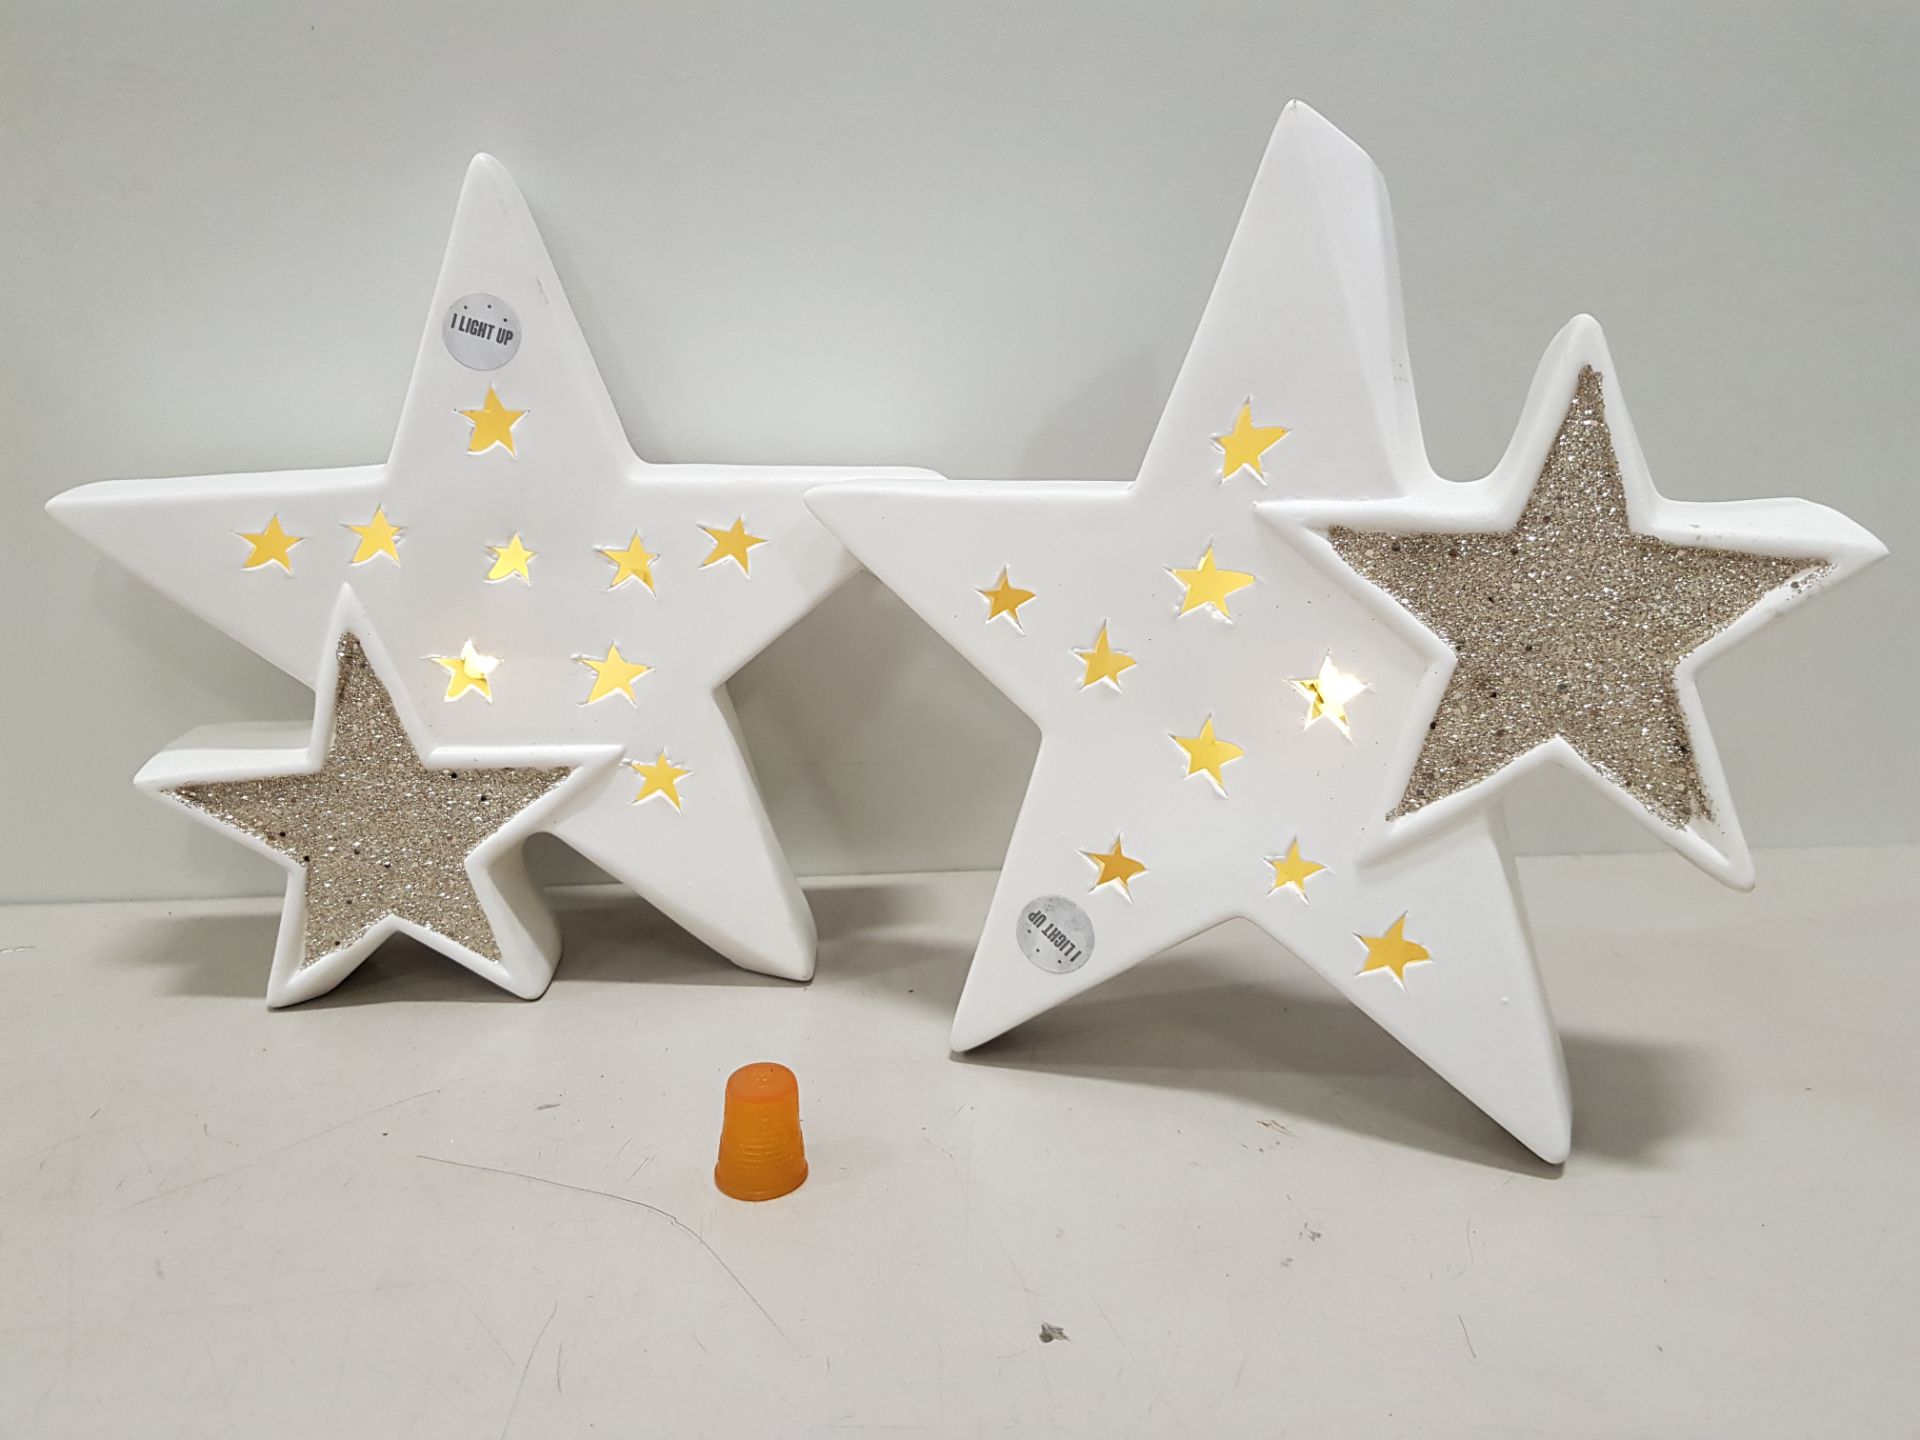 144 X BRAND NEW LIGHT UP STAR DECORATION INCLUDES BATTERYS - IN 9 BOXES